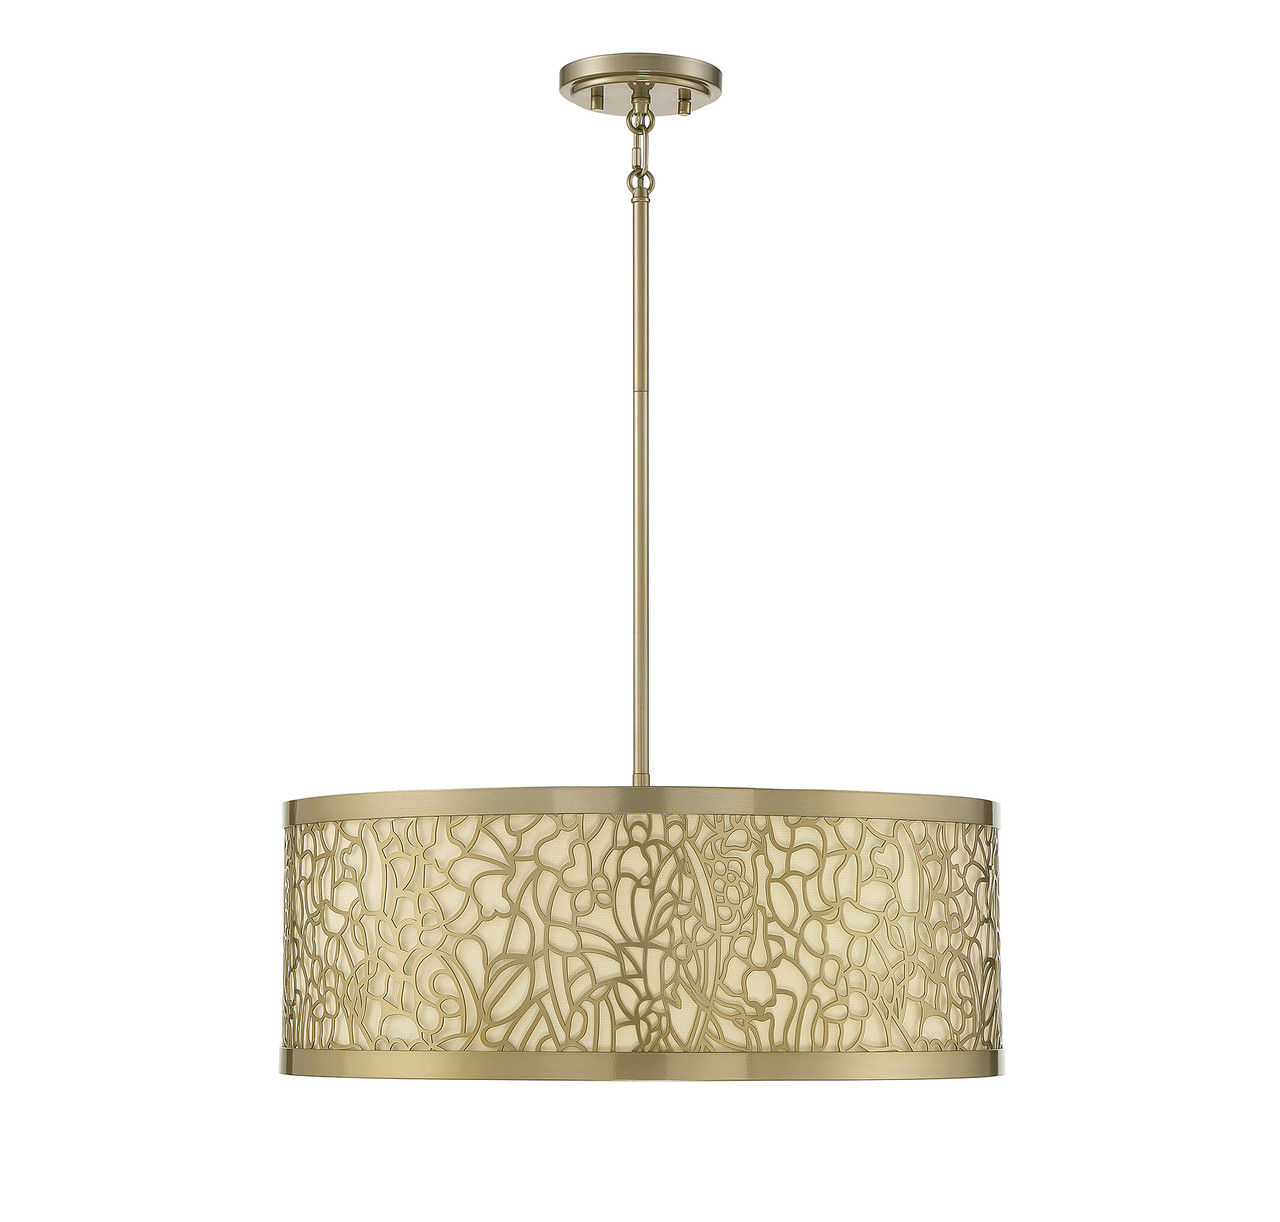 Beacon 4-Light Pendant in Burnished Brass (1-181-4-171